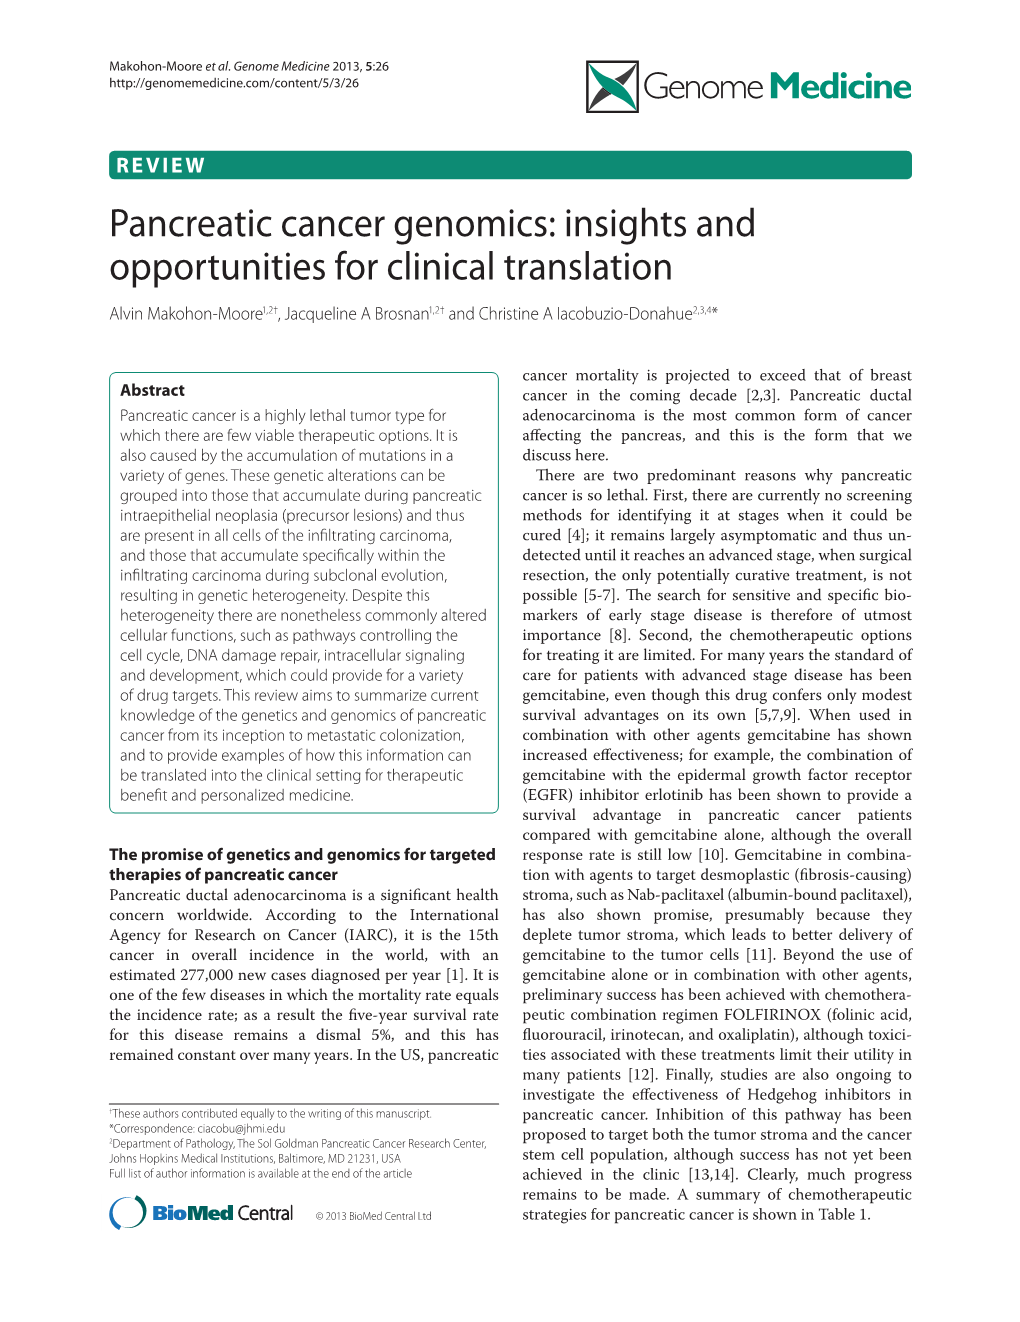 Pancreatic Cancer Genomics: Insights and Opportunities for Clinical